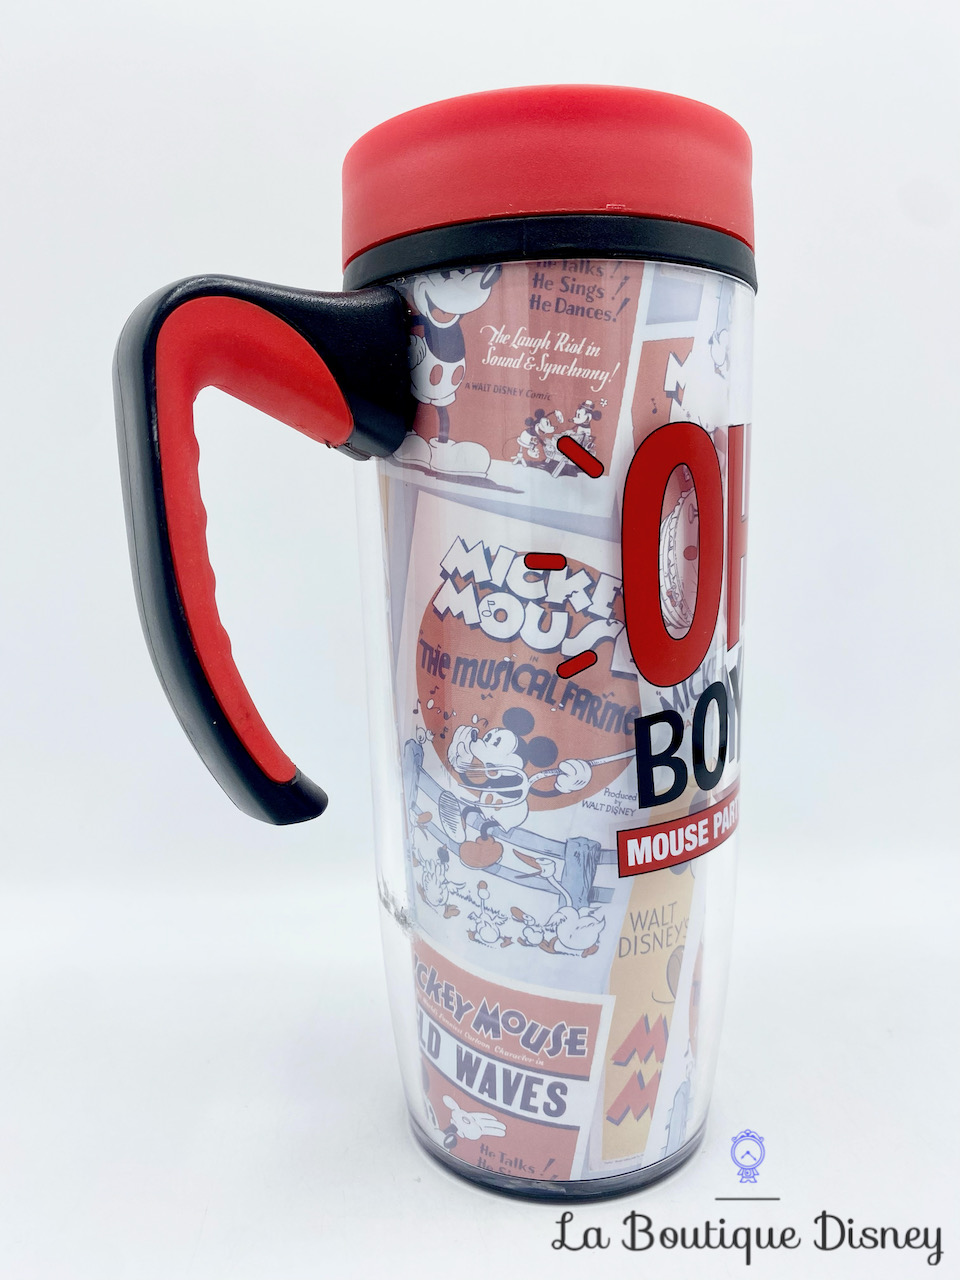 thermos-mickey-mouse-oh-boy-mouse-party-vip-disneyland-paris-mug-voyage-disney-rouge-2